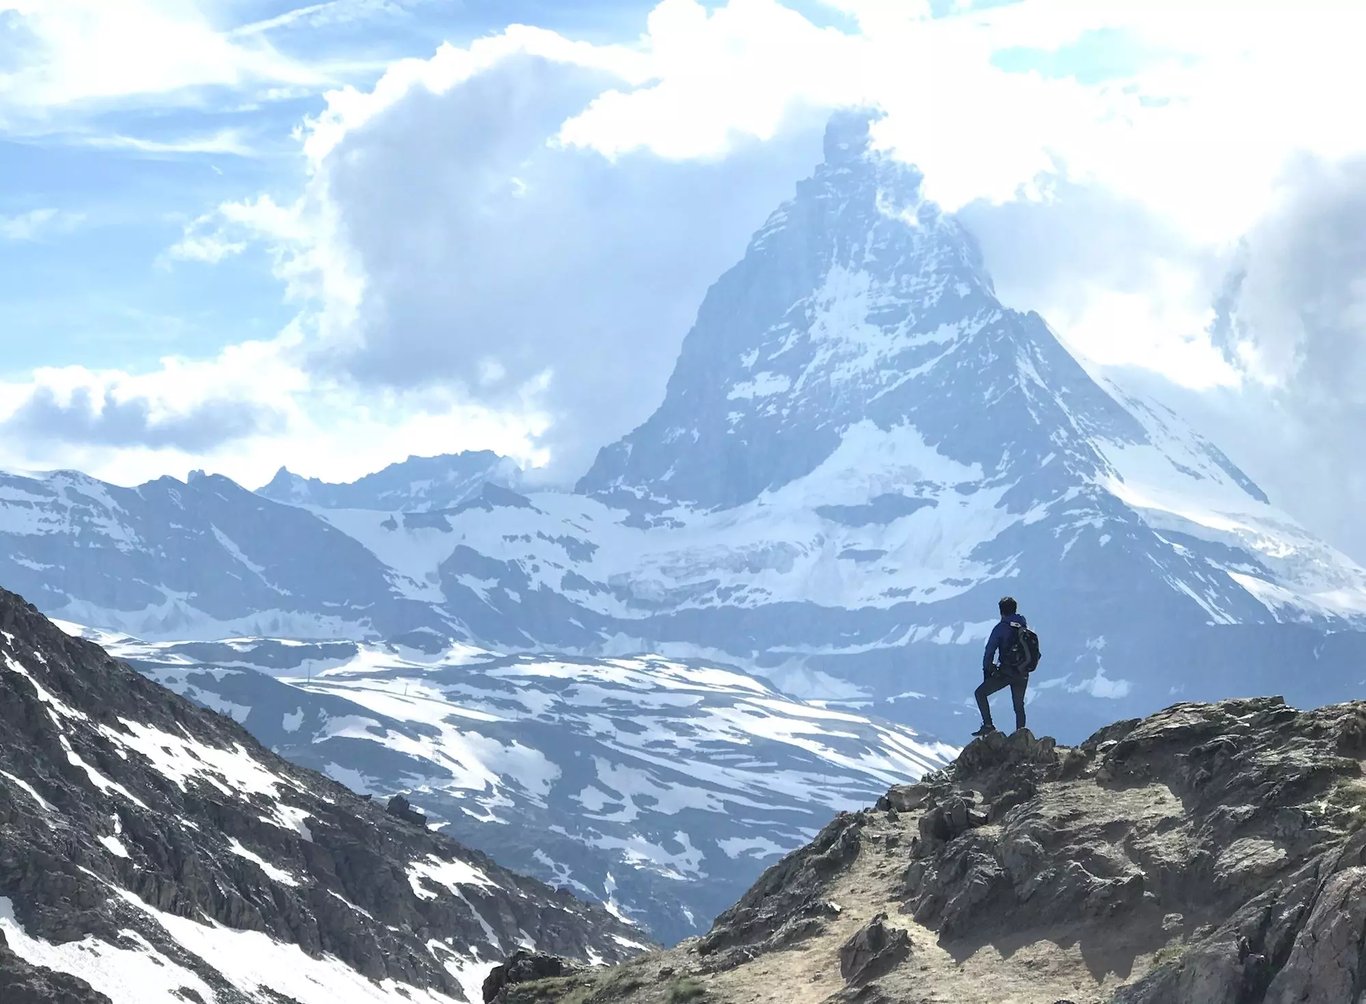 Climbing Matterhorn – Everything you need to know: camps, routes, weather, huts, equipment, etc.